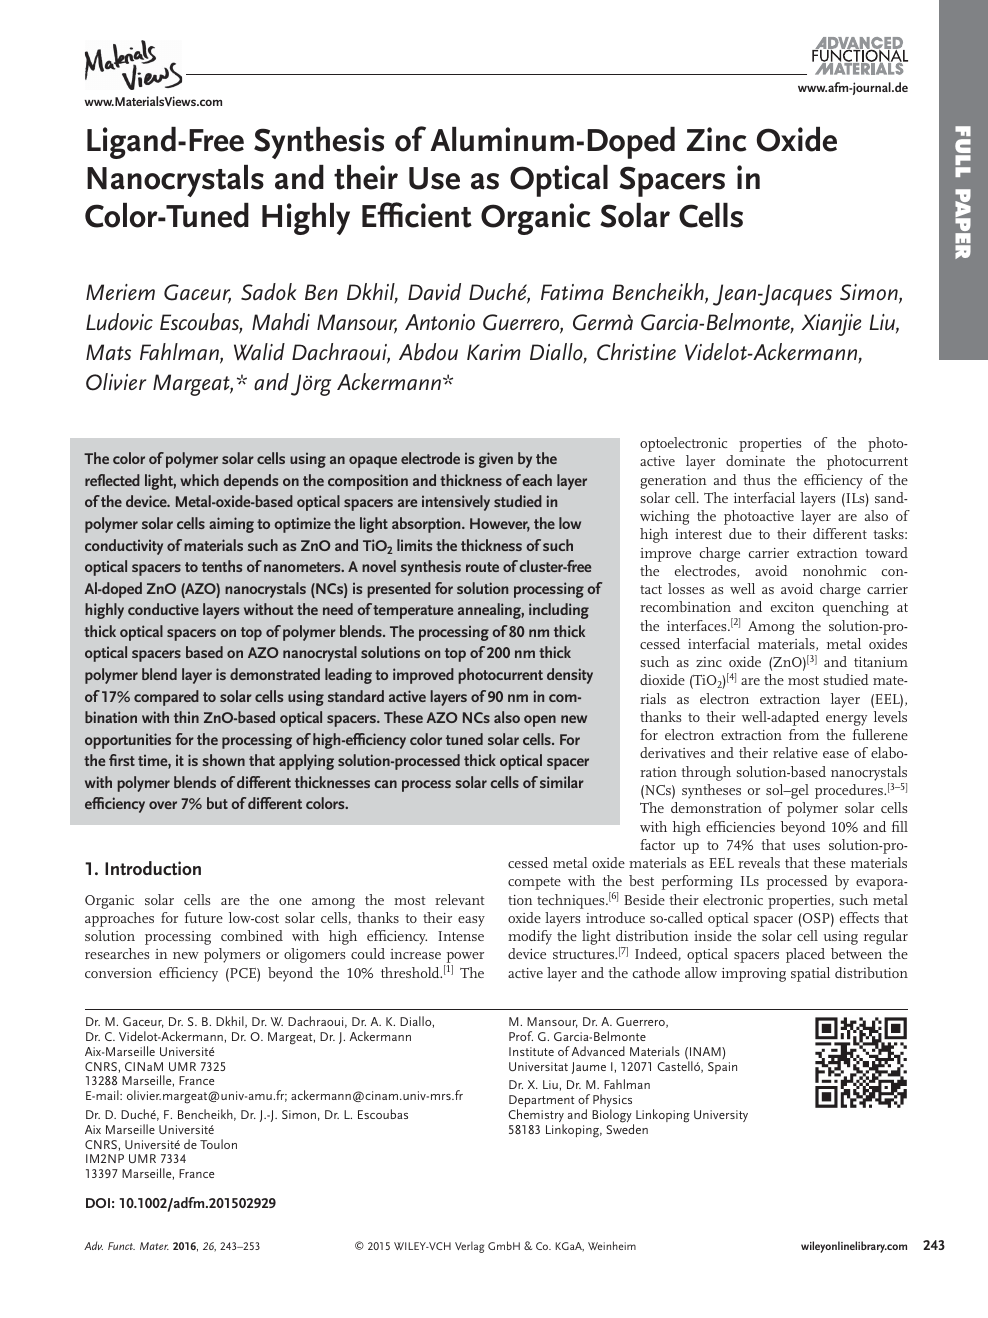 Ligand Free Synthesis Of Aluminum Doped Zinc Oxide Nanocrystals And Their Use As Optical Spacers In Color Tuned Highly Efficient Organic Solar Cells Topic Of Research Paper In Nano Technology Download Scholarly Article Pdf And